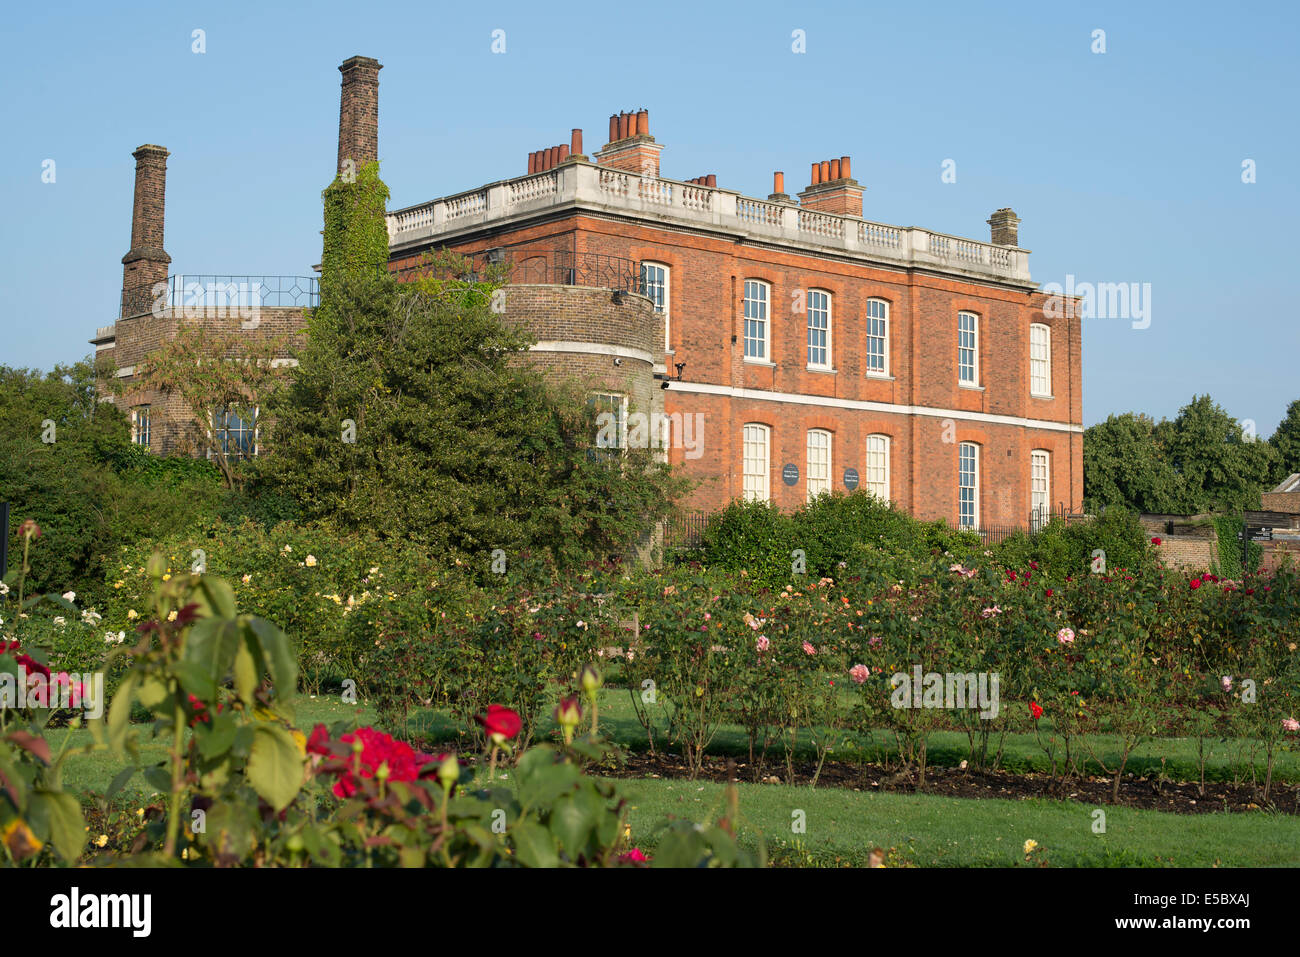 Rangers House in Greenwich, England. Photograph taken from the rose garden in Greenwich Park. Shown against blue sky. Stock Photo